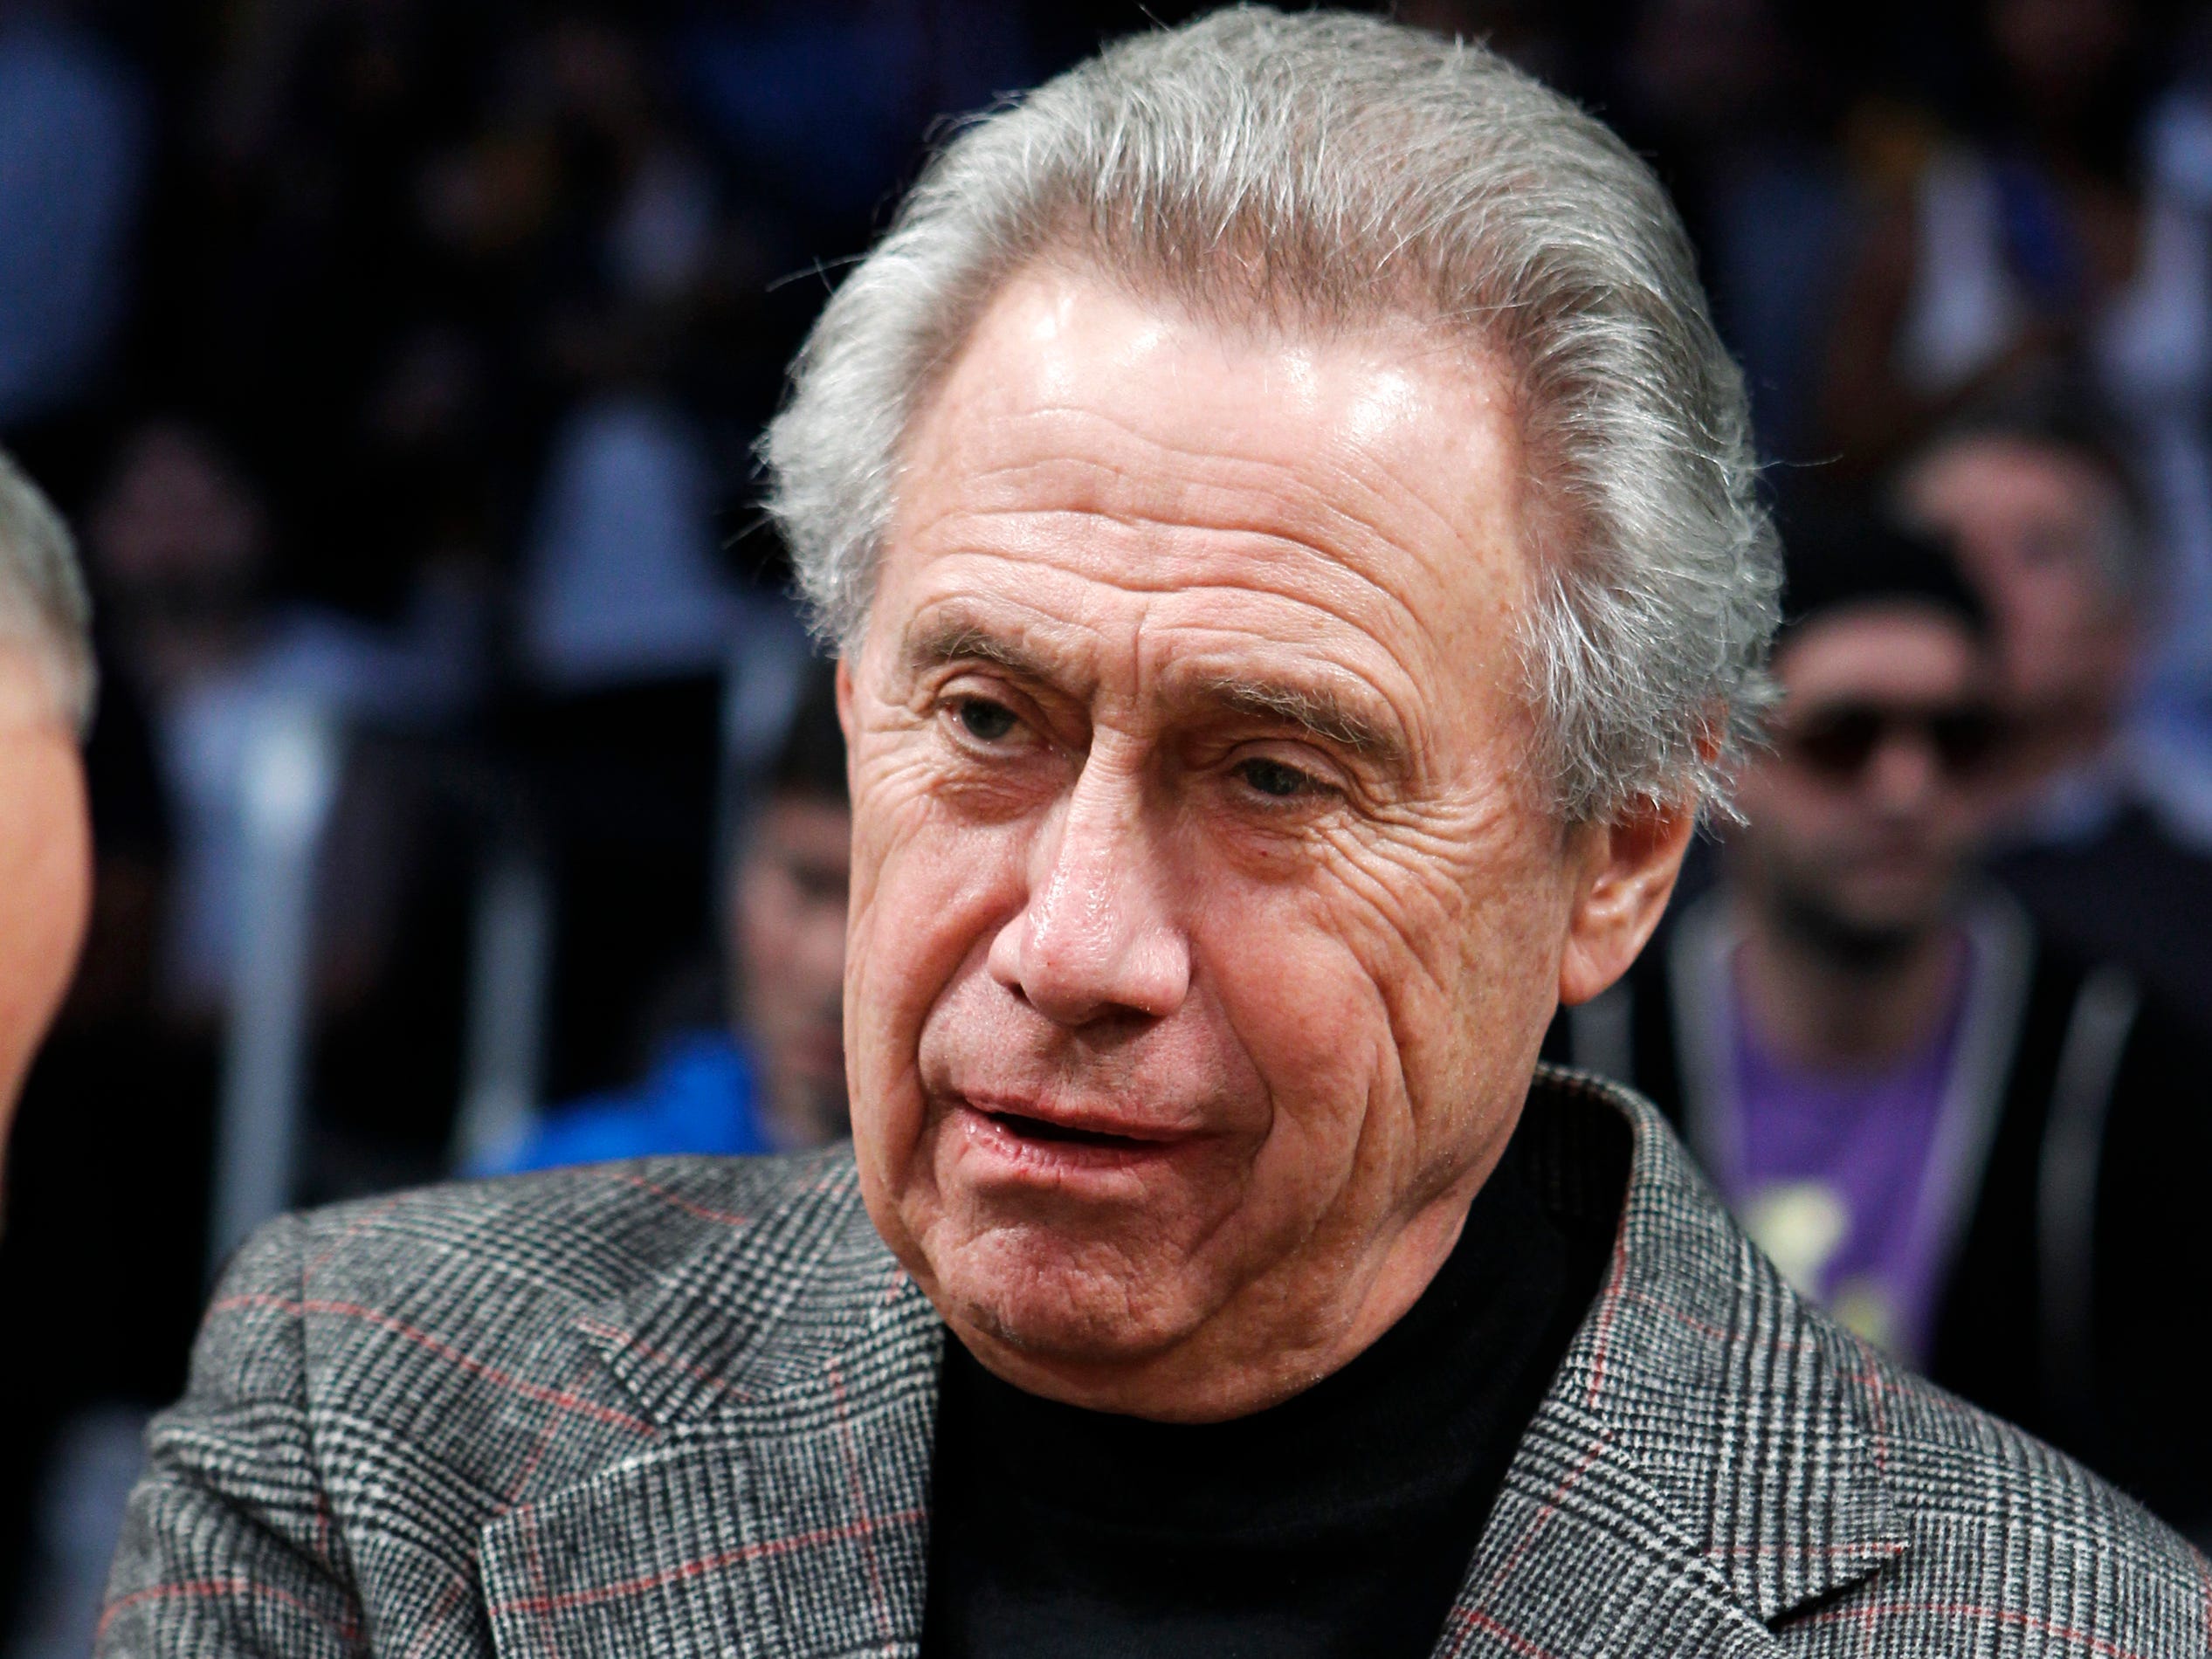 <p>Anschutz, who is worth $19 billion, is the founder of Anschutz Entertainment Group, which owns the Los Angeles Kings hockey team and soccer club LA Galaxy.</p>